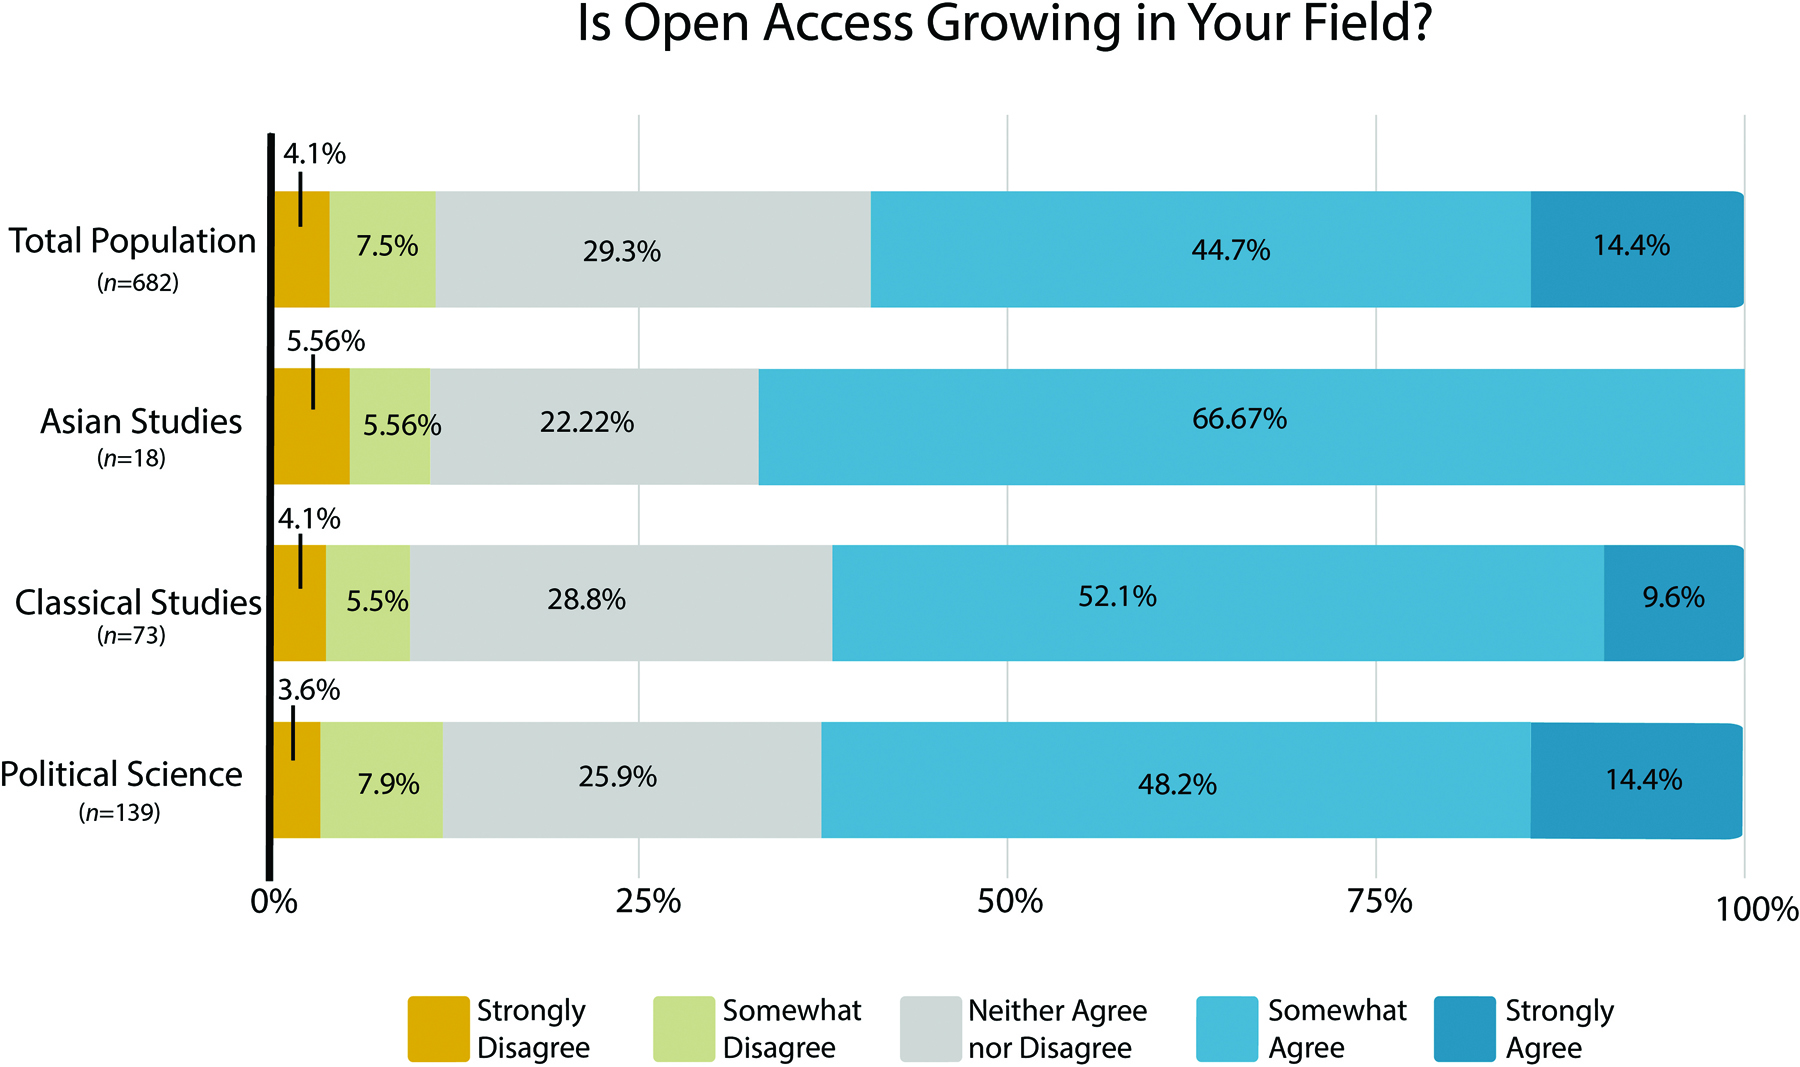 A stacked bar chart that represents answers to the question “Is open access Growing in Your Field?” Each bar represents a single academic field and is 100% in total. For the total population (where n=682),, the answer for “strongly disagree” is 4.1%, the answer for a somewhat disagree is 7.5%, the answer for neither agree nor disagree is 29.3%, the answer for somewhat agree is 44.7%, and the answer for strongly agree is 14.4.% For Asian Studies (where n=18), the answer for “strongly disagree” is 5.56%, the answer for a somewhat disagree is 5.56%, the answer for neither agree nor disagree is 22.22%, the answer for somewhat agree is 66.67%. For Classical Studies (where n=73), the answer for “strongly disagree” is 4.1%, the answer for a somewhat disagree is 5.5%, the answer for neither agree nor disagree is 28.8%, the answer for somewhat agree is 52.1%, and the answer for strongly agree is 9.6%. For Political Science (where n=139), the answer for “strongly disagree” is 3.6%, the answer for a somewhat disagree is 7.9%, the answer for neither agree nor disagree is 25.9%, the answer for somewhat agree is 48.2%, and the answer for strongly agree is 14.4%.